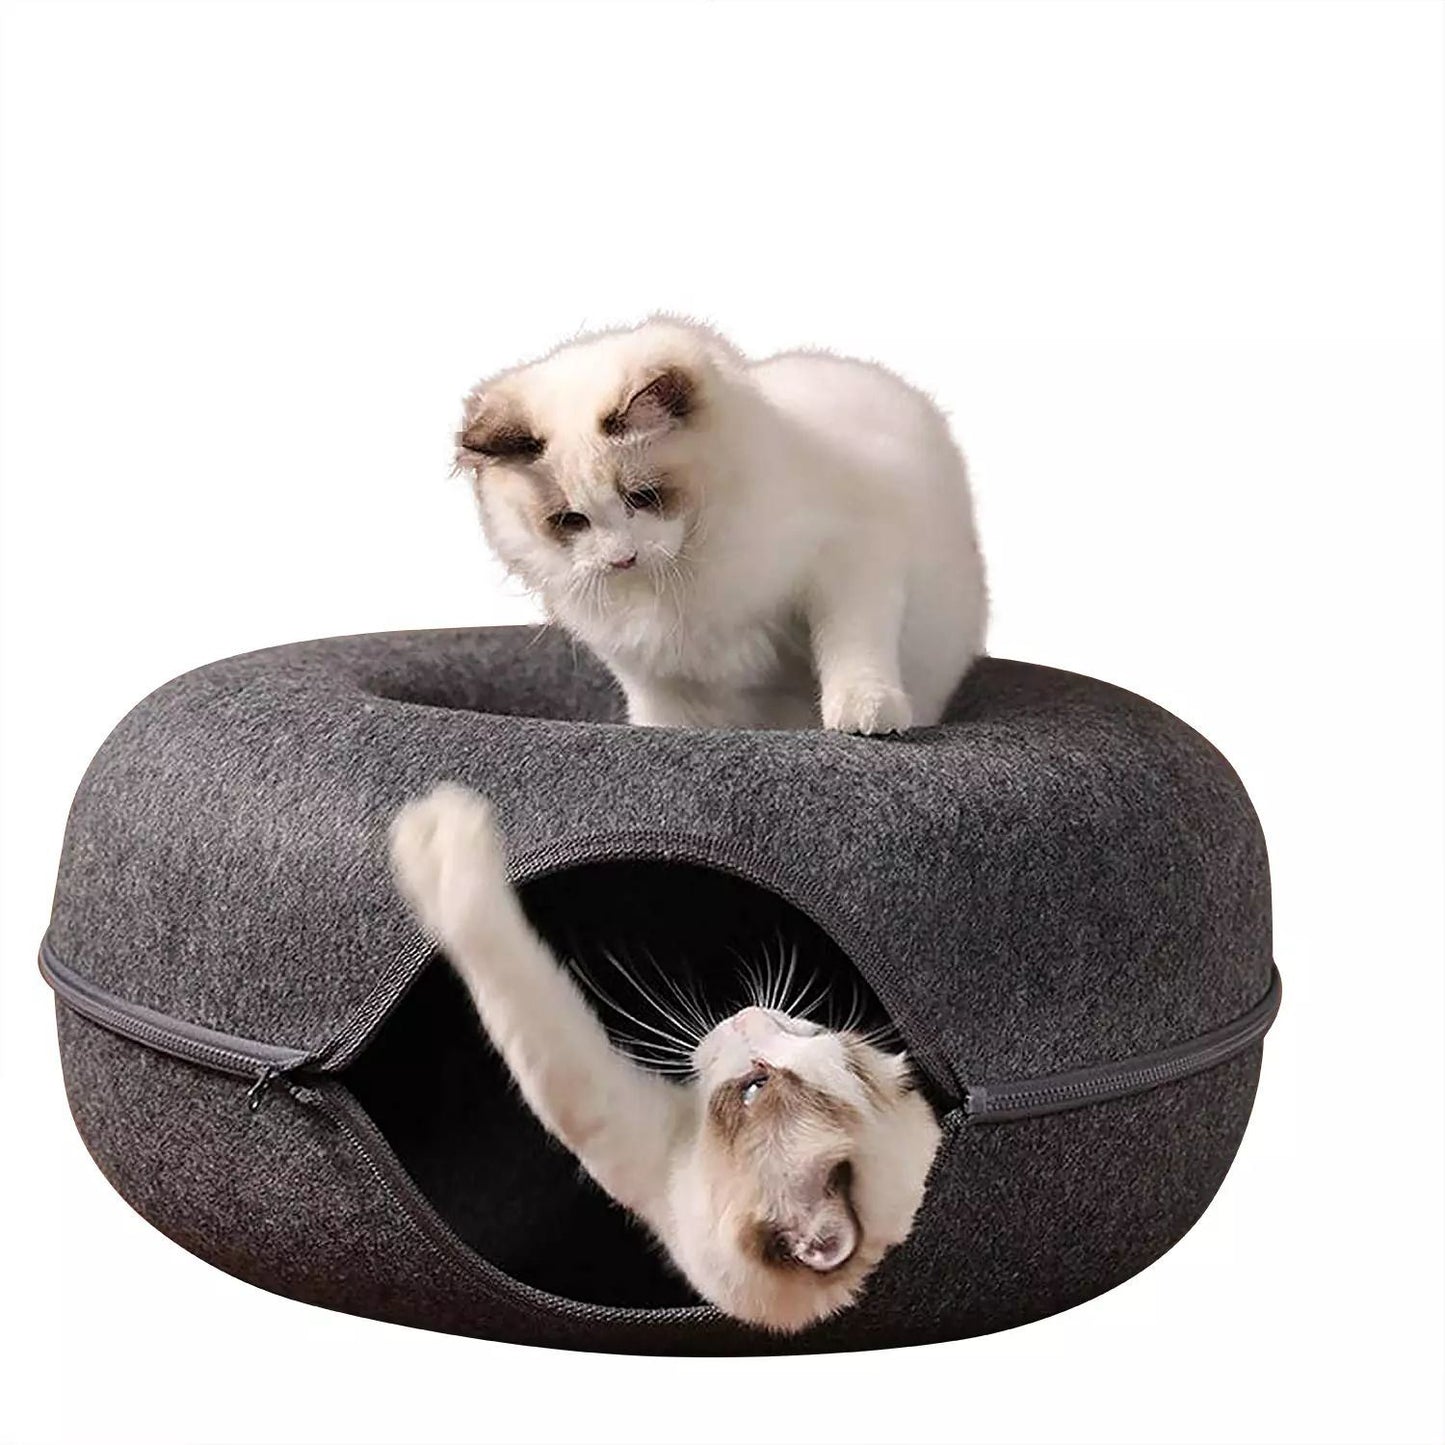 LARGE Cat Tunnel Cave Bed USA SELLER Felt Donut Cat House Detachable Small Pet